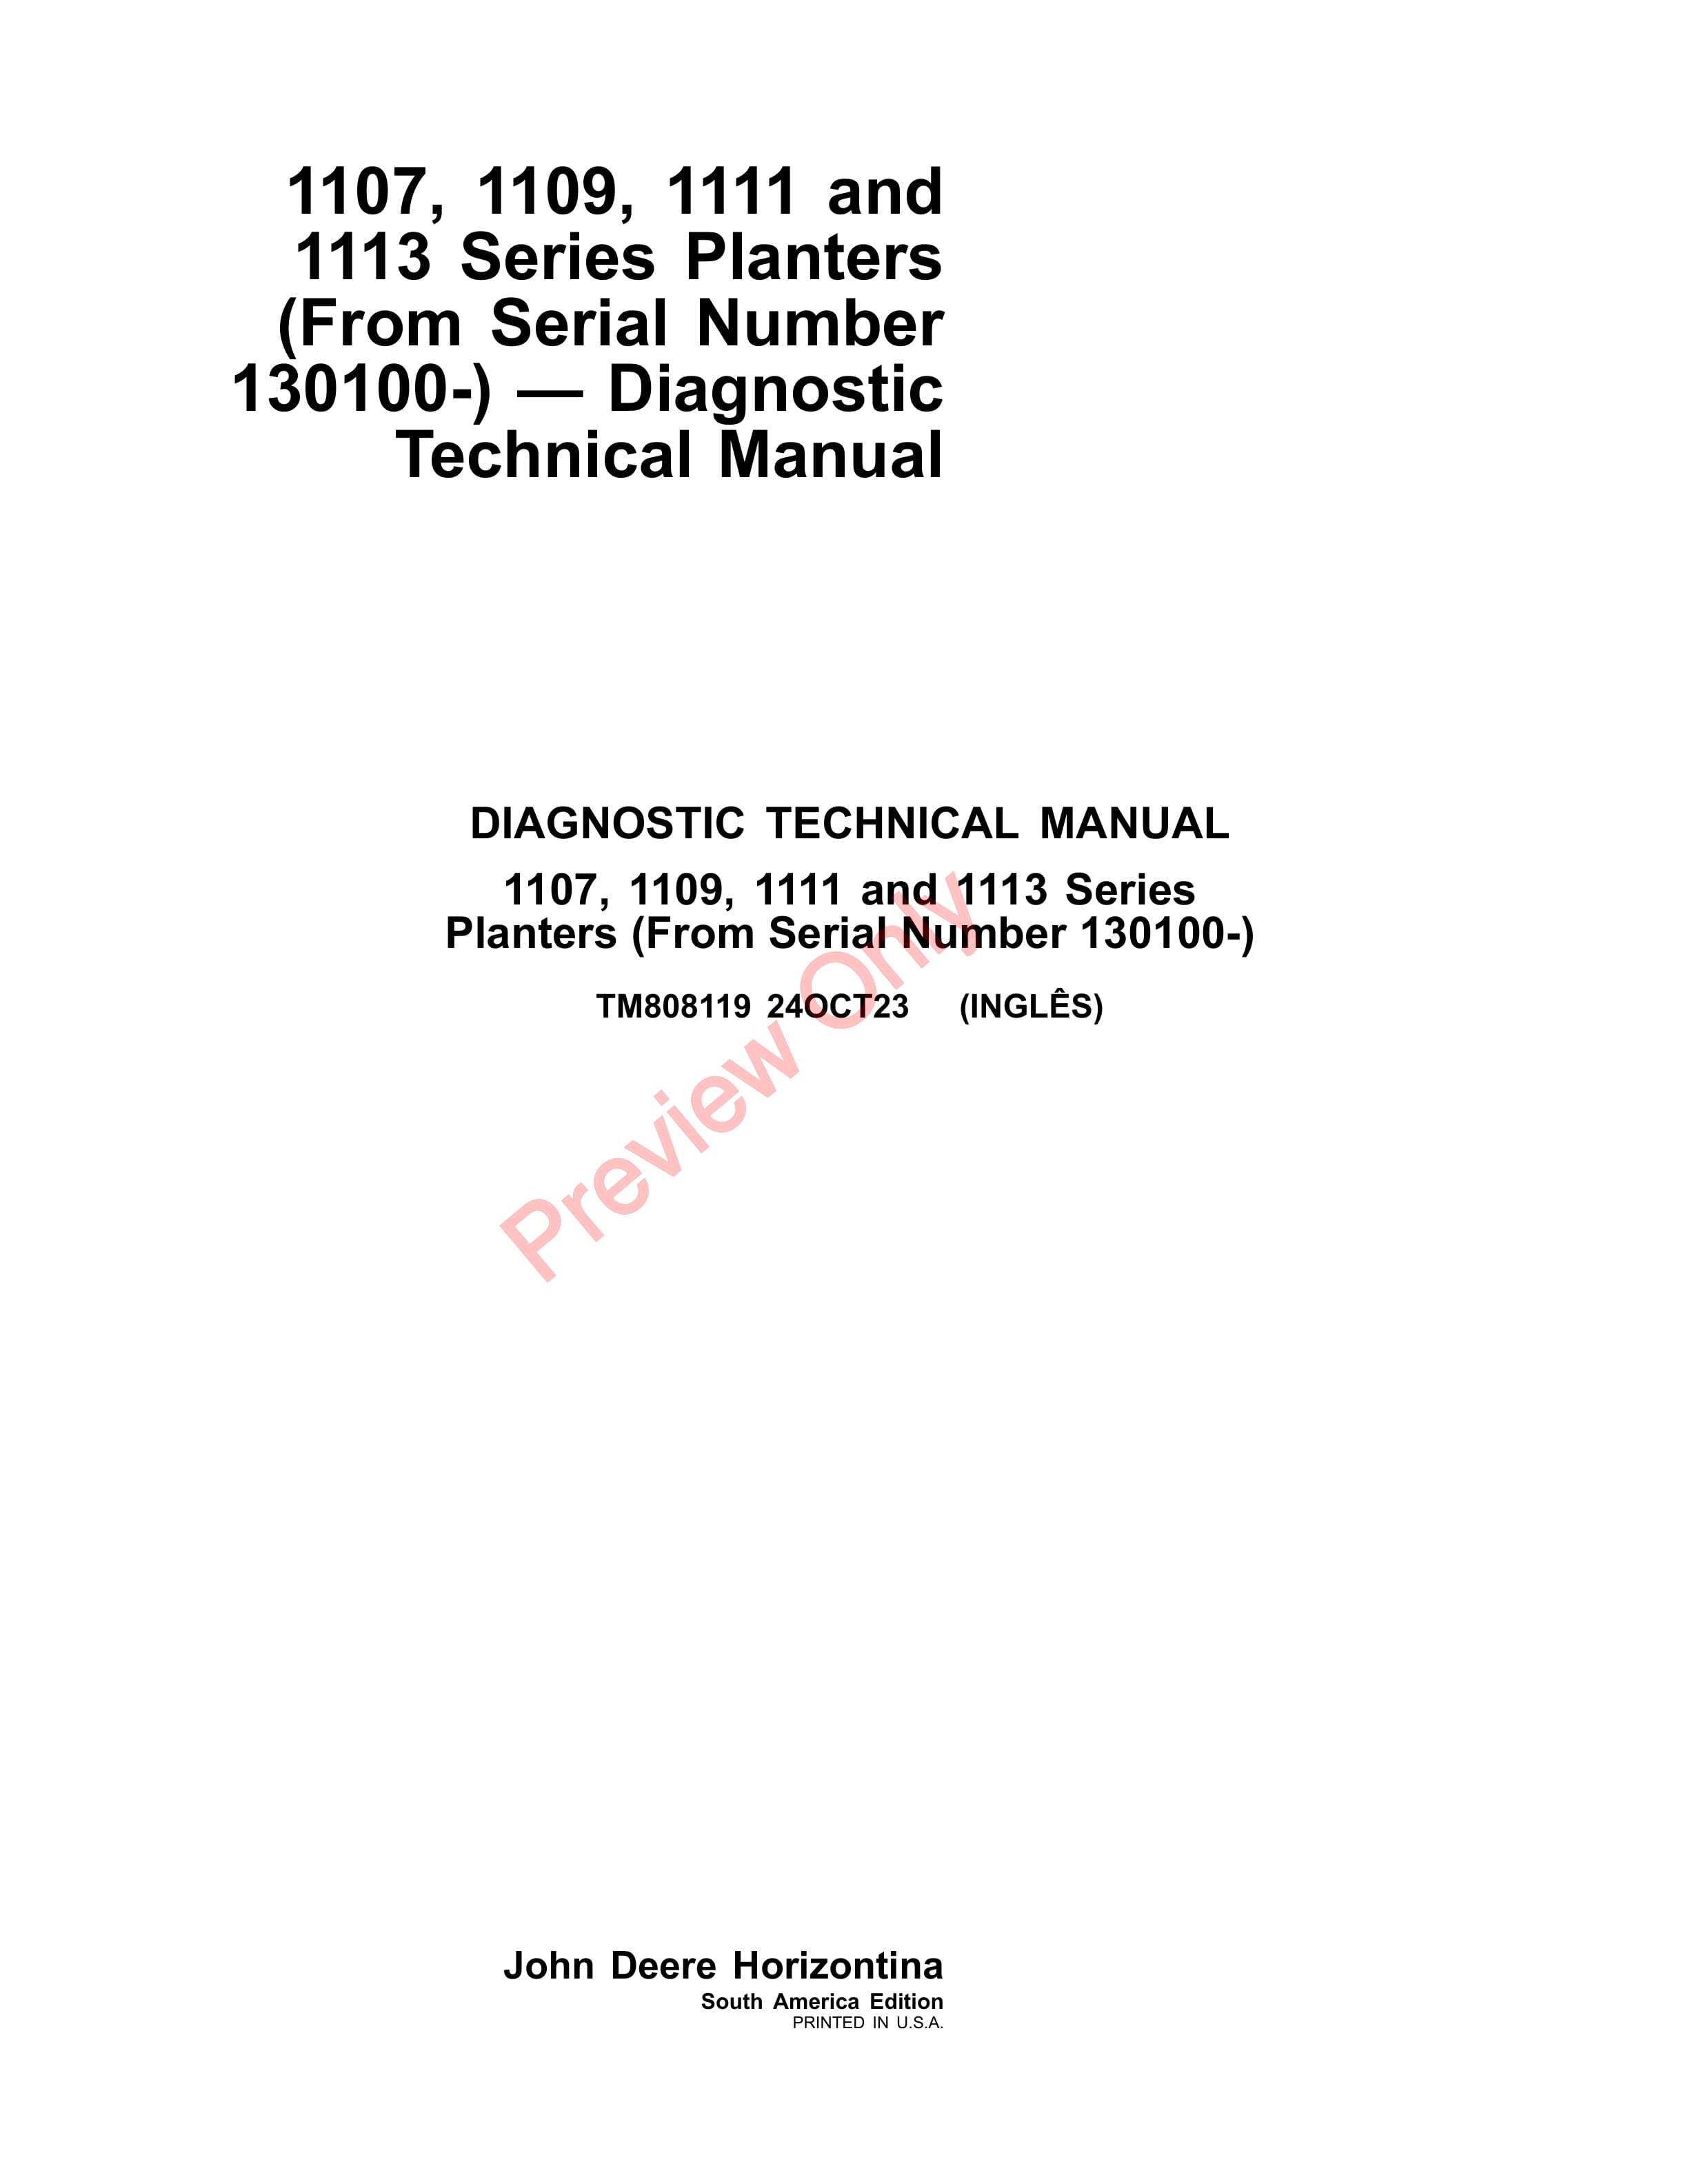 John Deere 1107, 1109, 1111 and 1113 Series Planters (From Serial Number 130100 Diagnostic Technical Manual TM808119 24OCT23-1